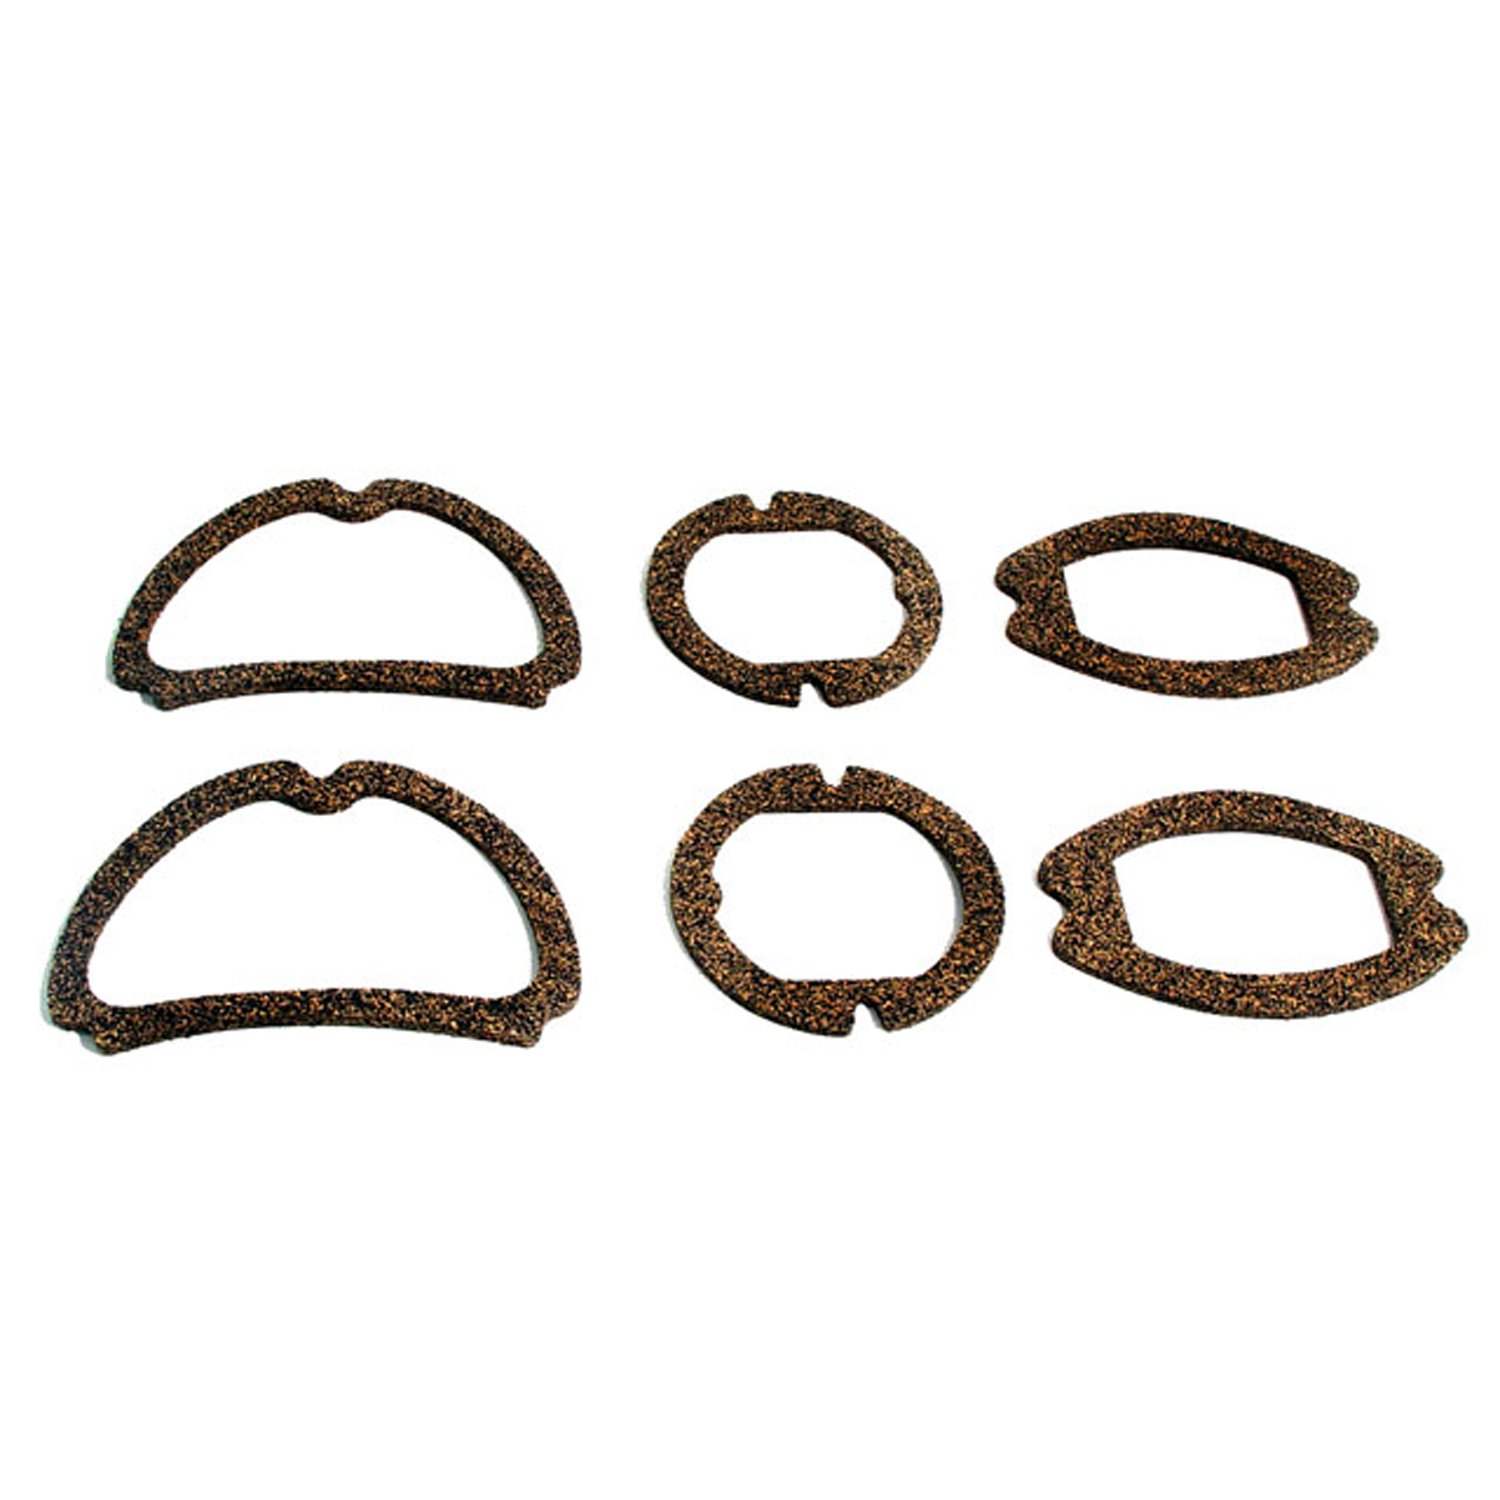 1957 Chevrolet One-Fifty Series 6-Piece Lens Gasket Kit.-LGK 2004-102